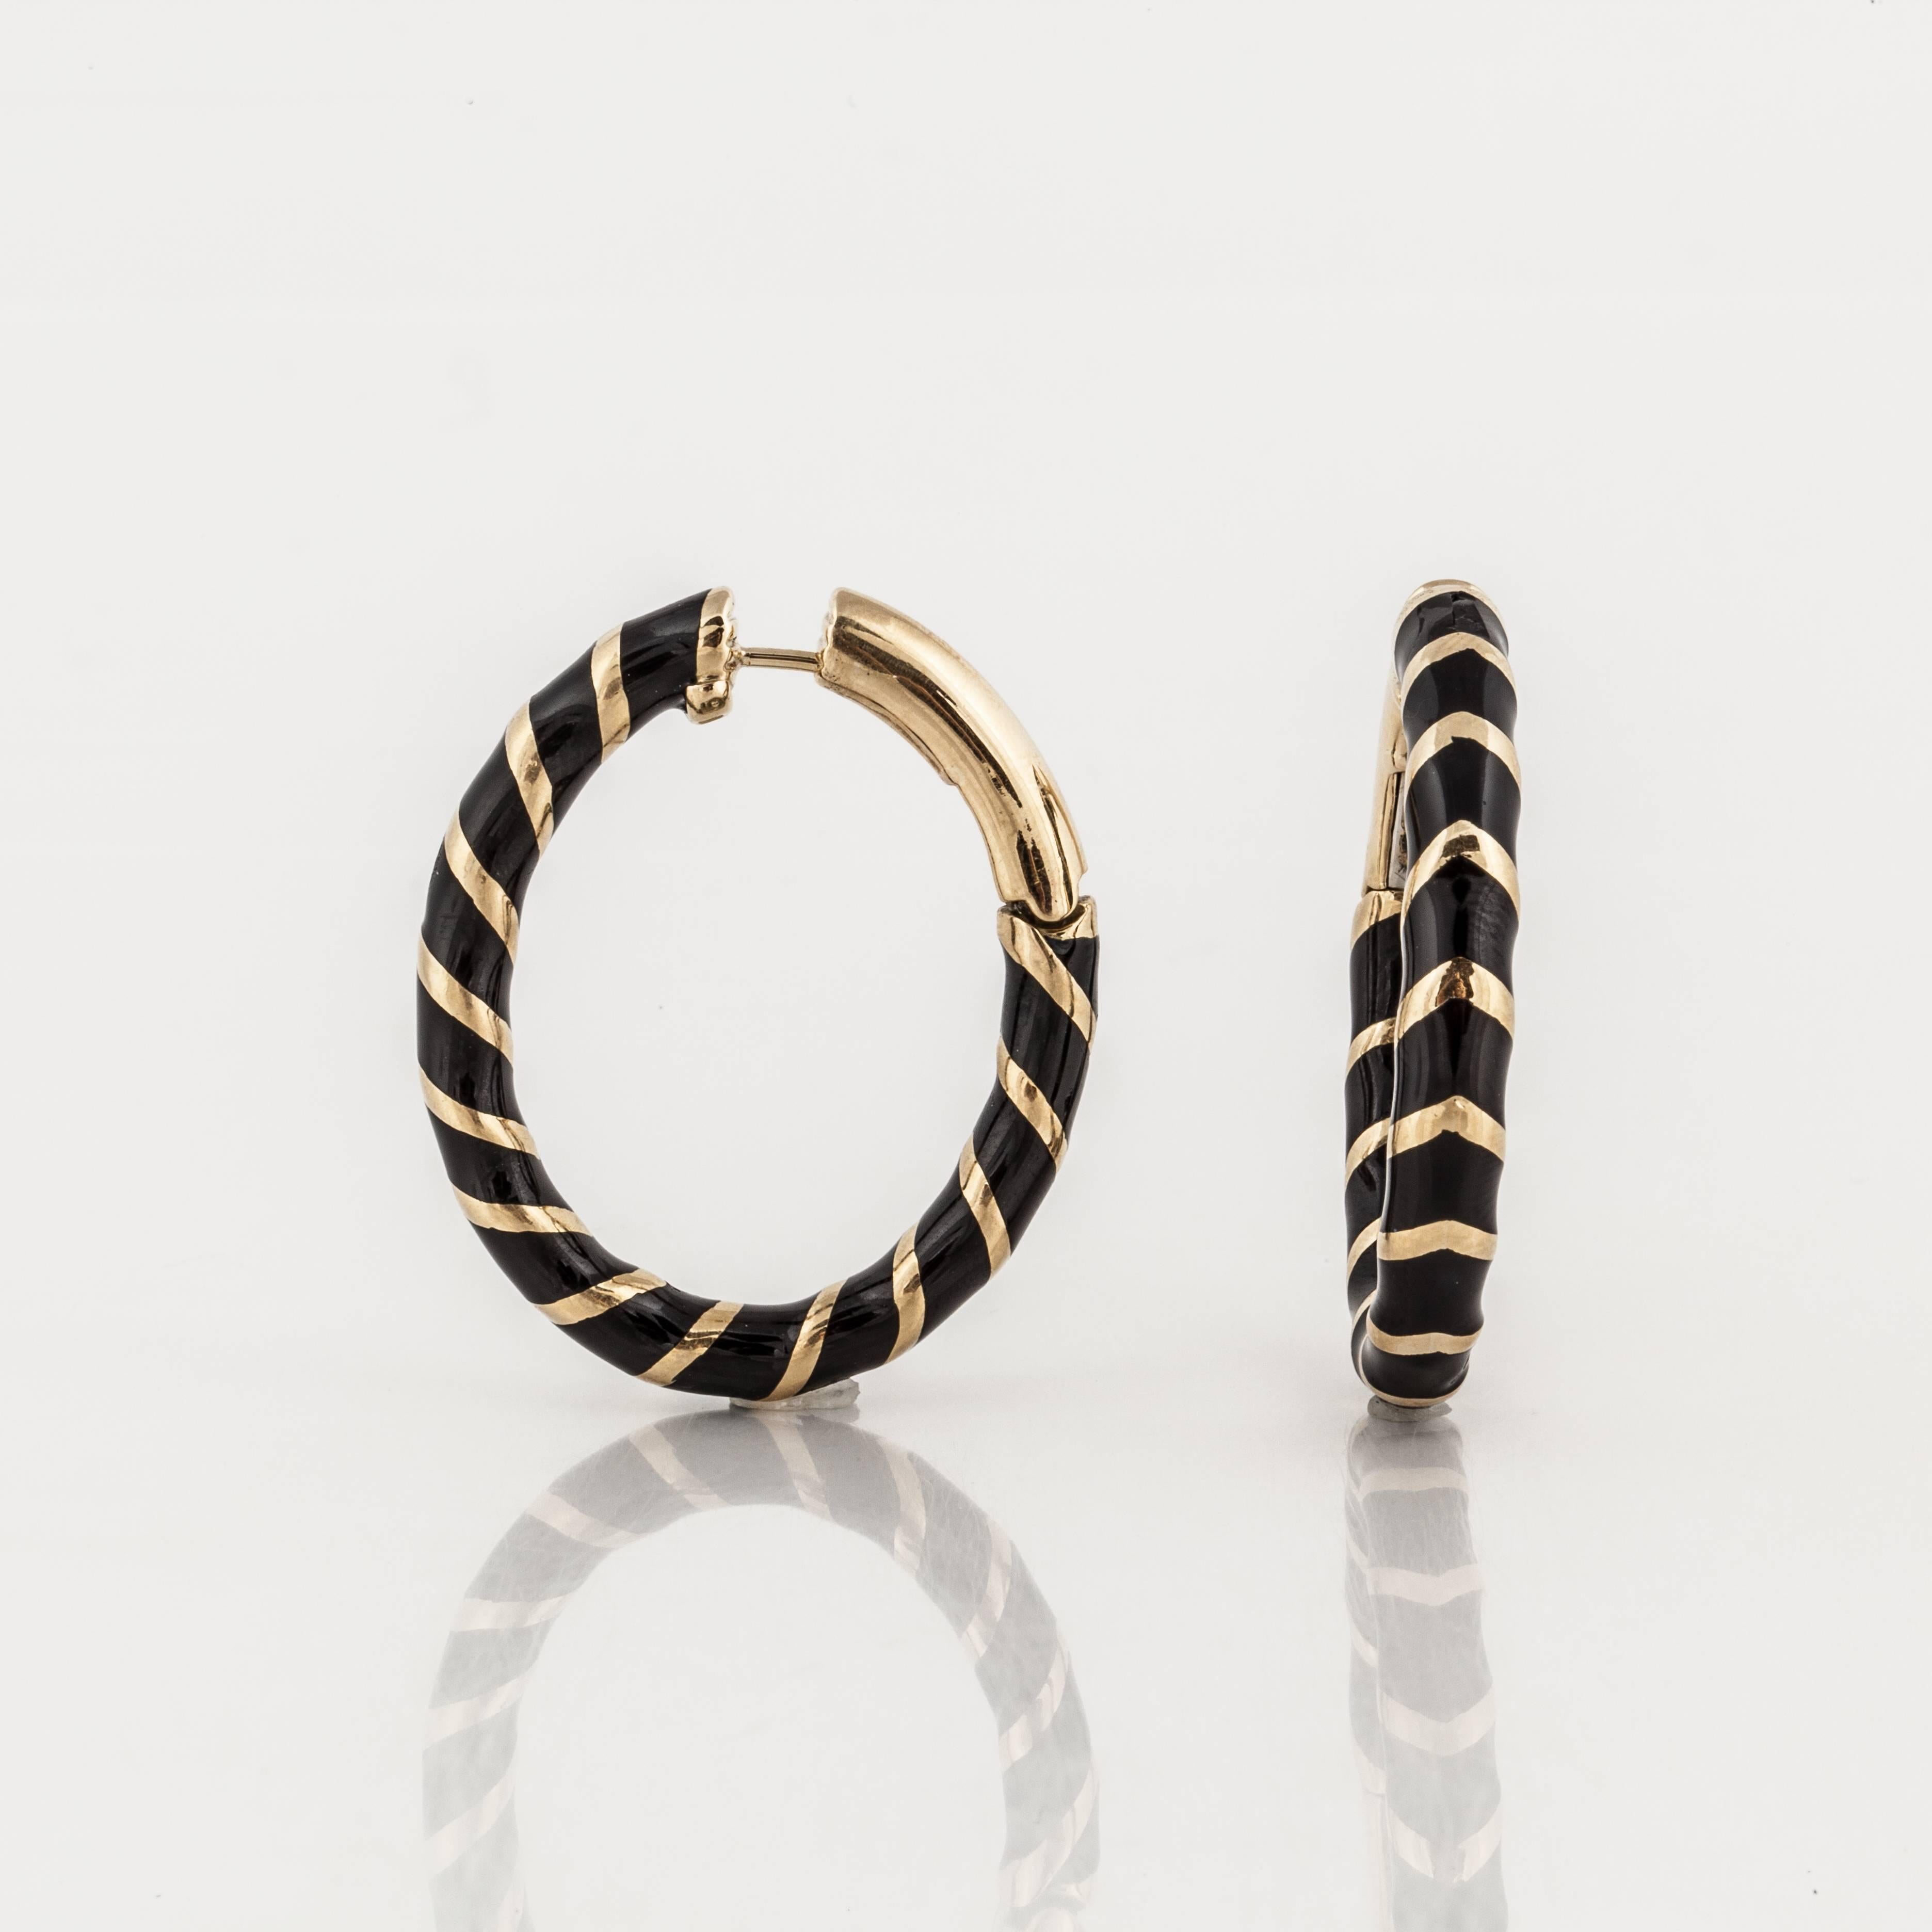 These David Webb earrings are elongated hoops composed of 18K yellow gold with stripes of black enamel.  They measure 1 3/8 inches long by 1 1/4 inches wide.  They are marked 